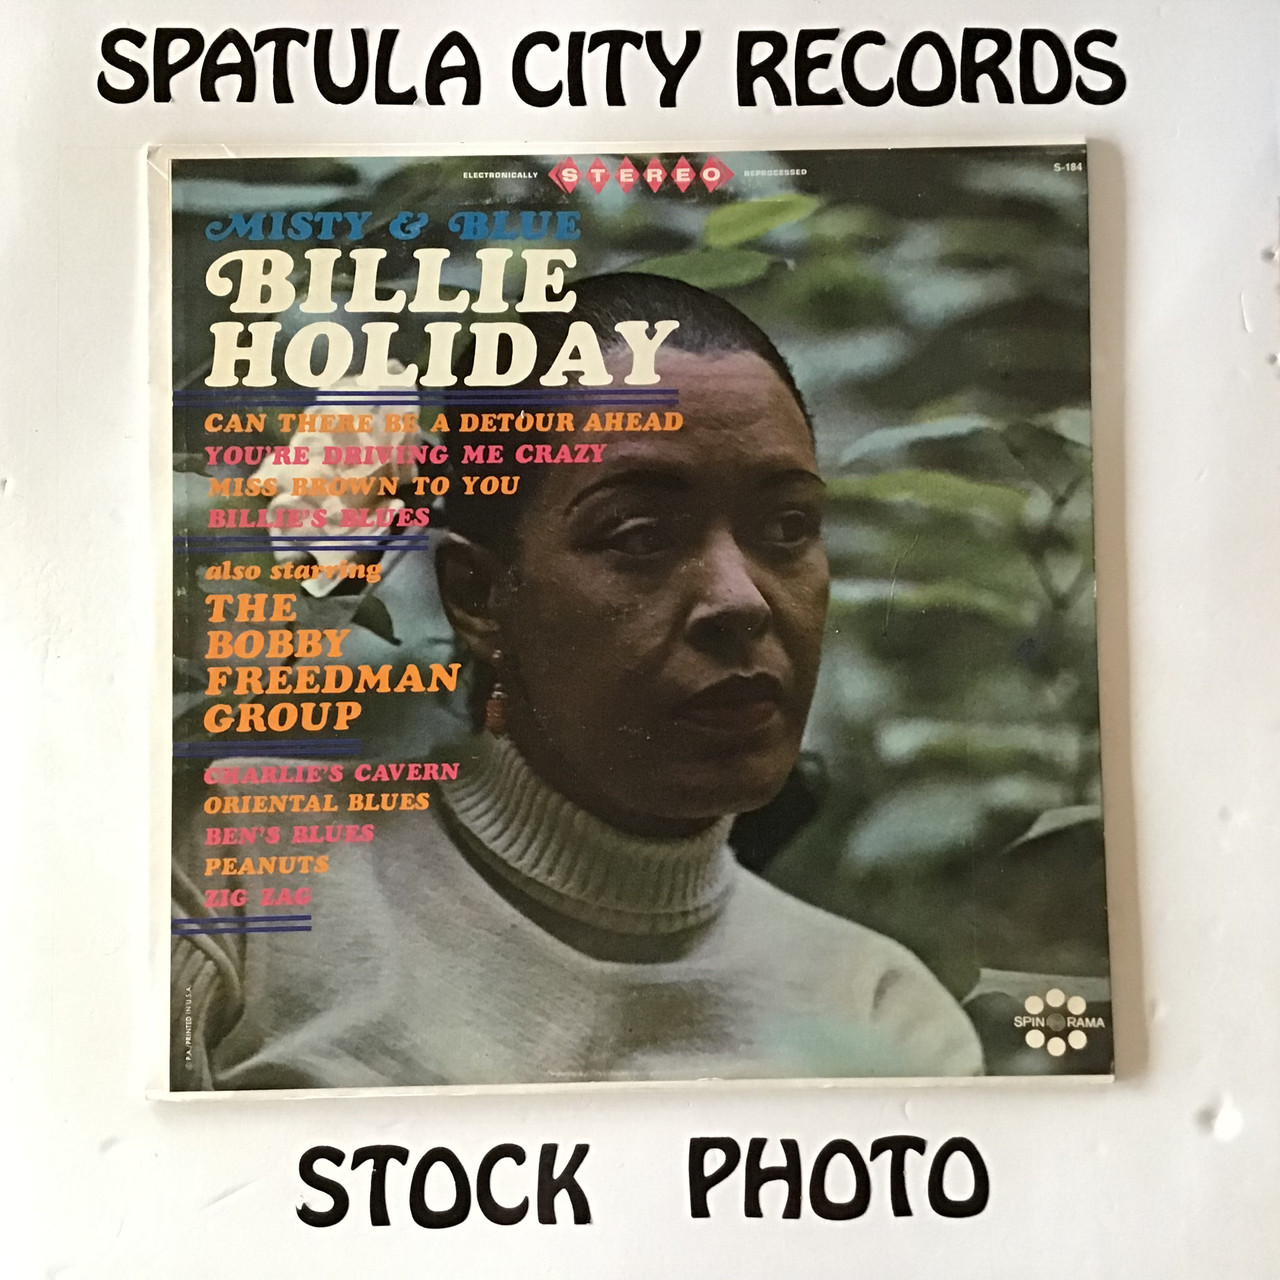 Billy Holiday also starring The Bobby Freedman Group - Misty and Blue - vinyl record LP